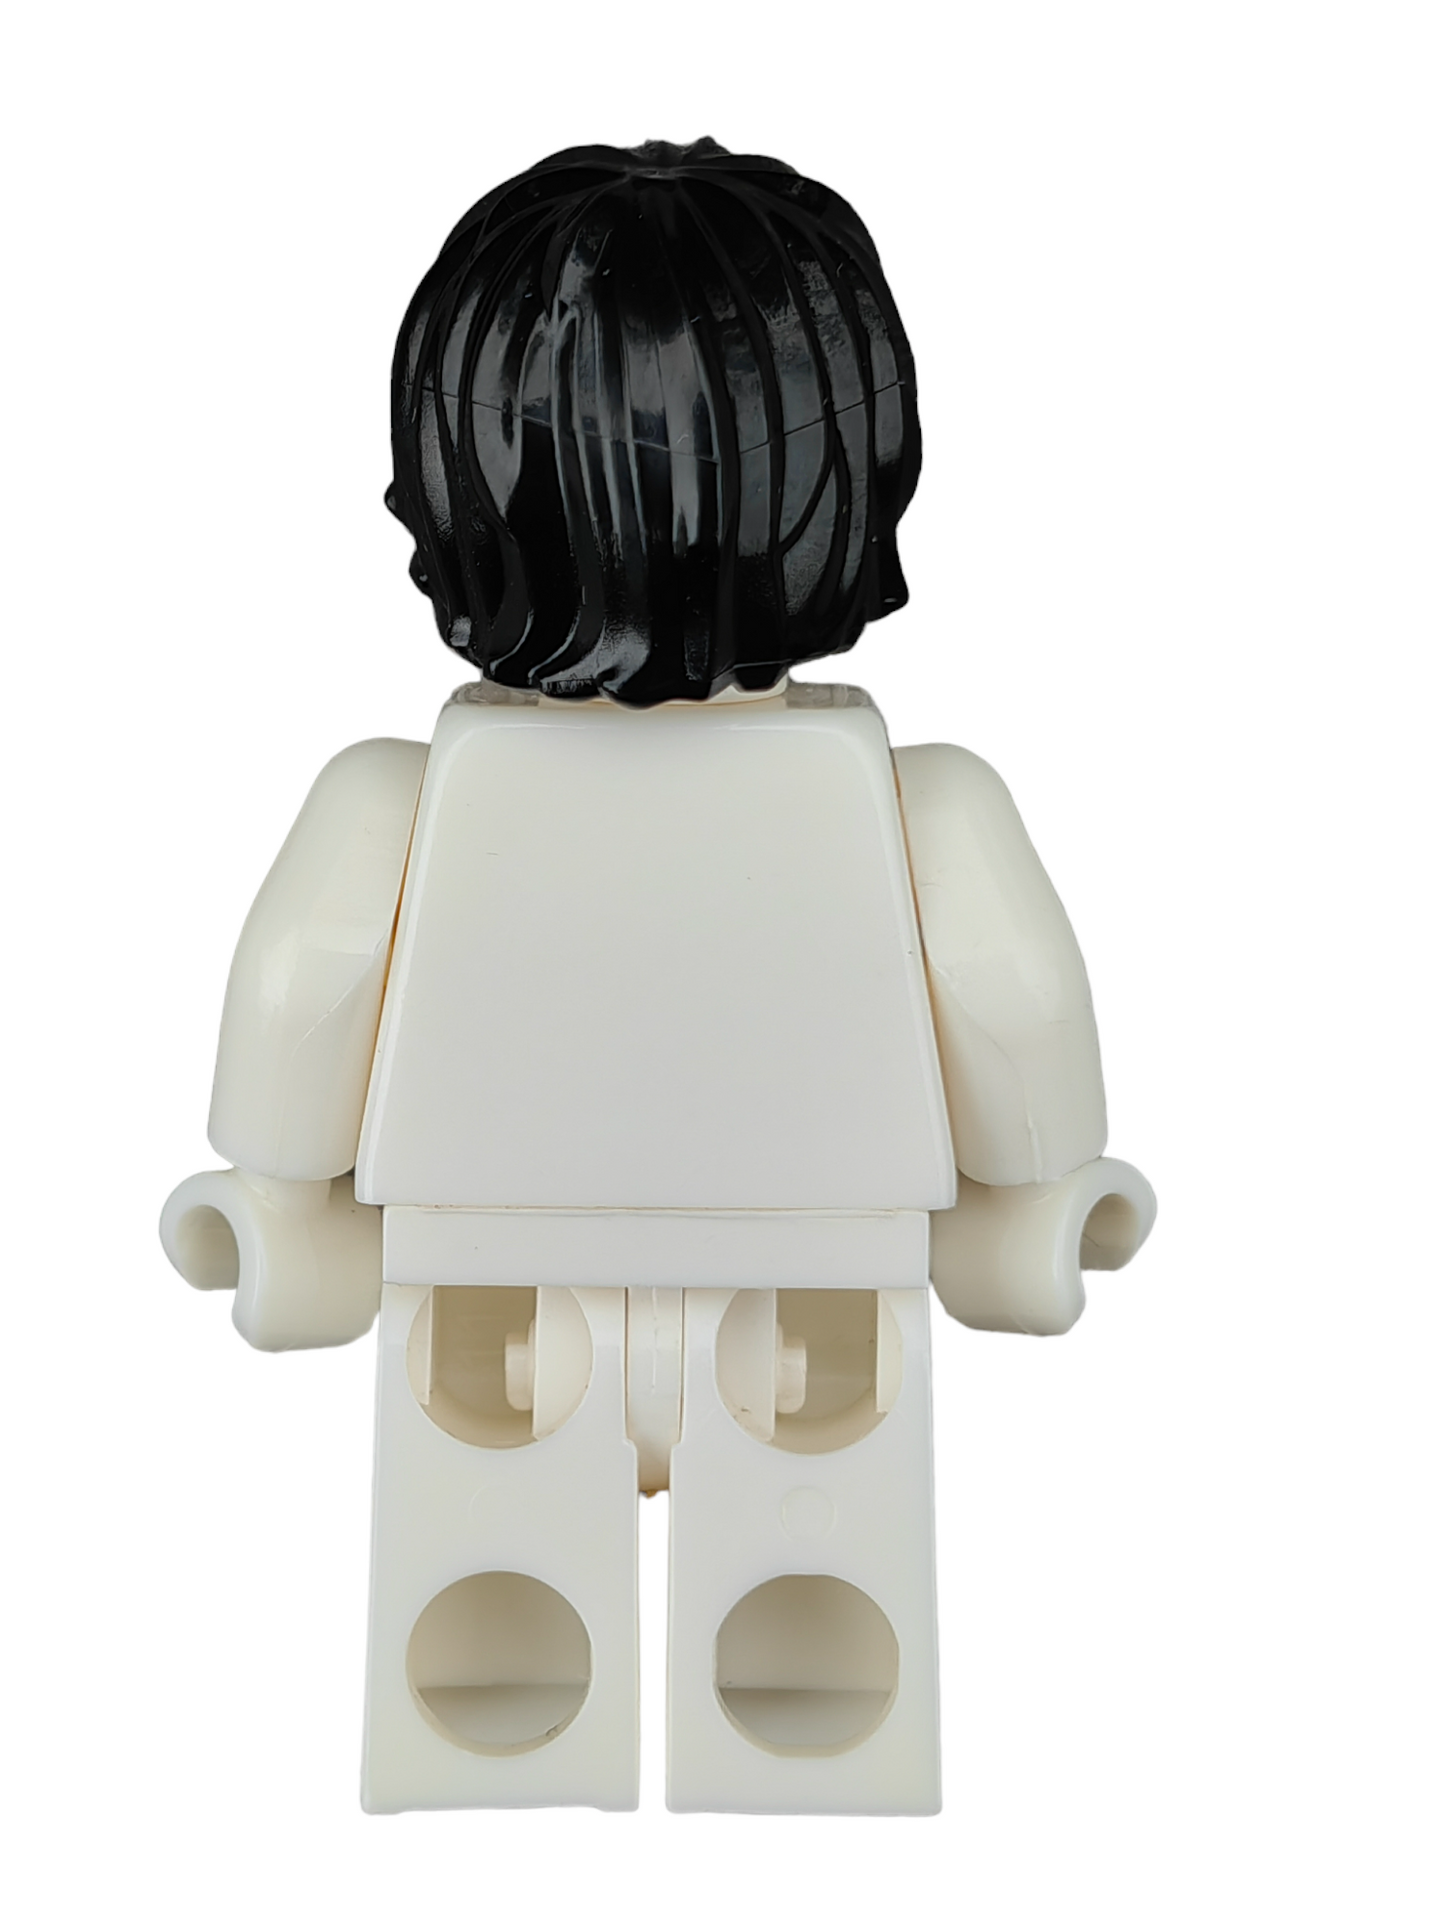 LEGO Wig, Black Hair Combed to the Side  - UB1194